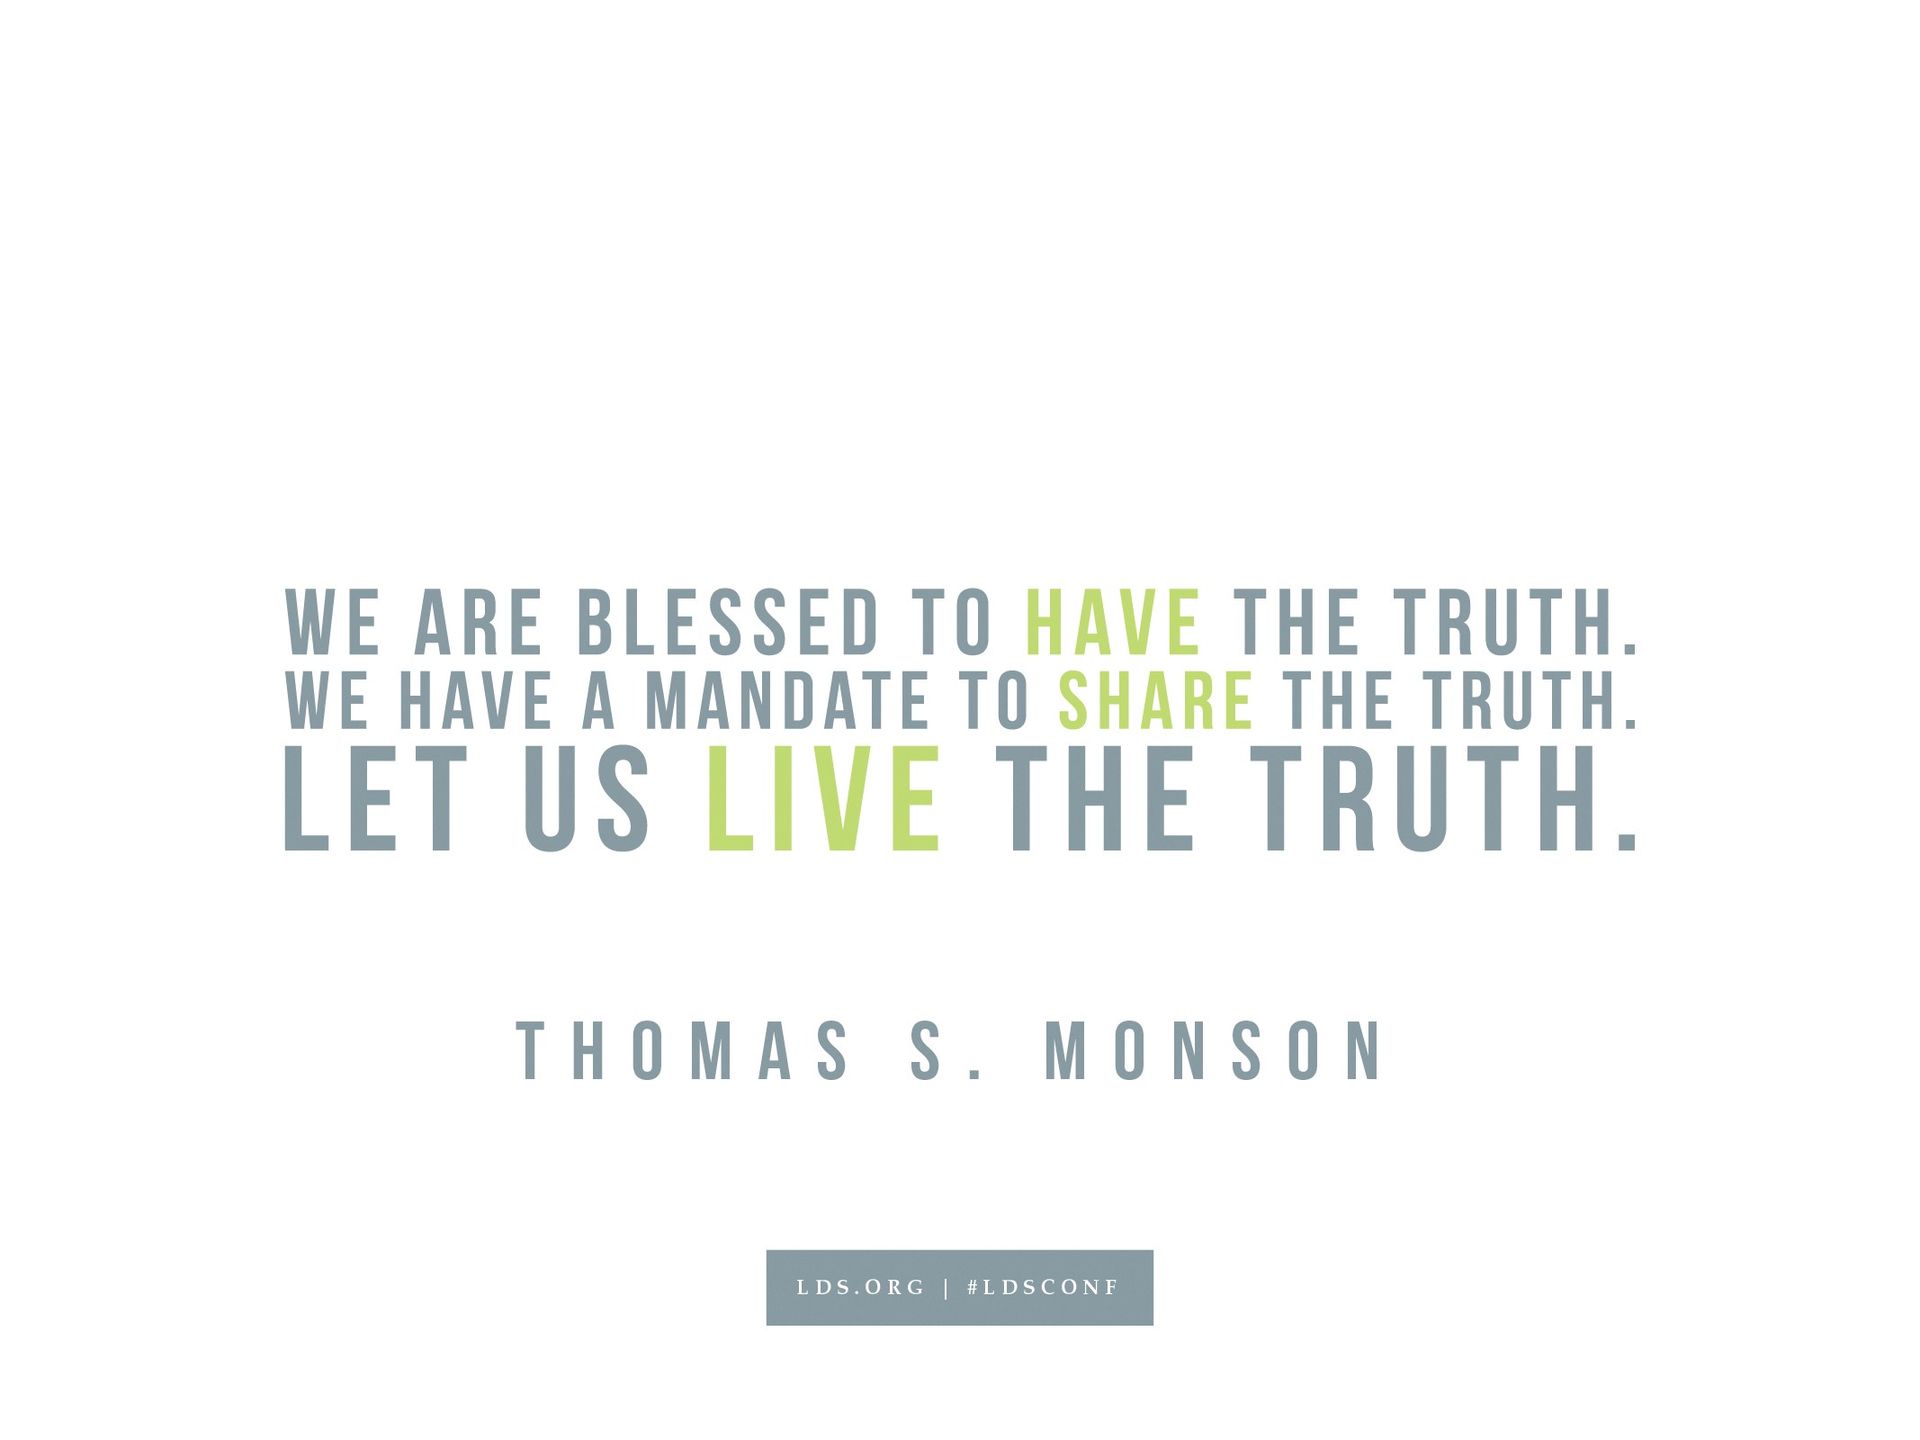 “We are blessed to have the truth. We have a mandate to share the truth. Let us live the truth.”—Thomas S. Monson, “The Perfect Path to Happiness”